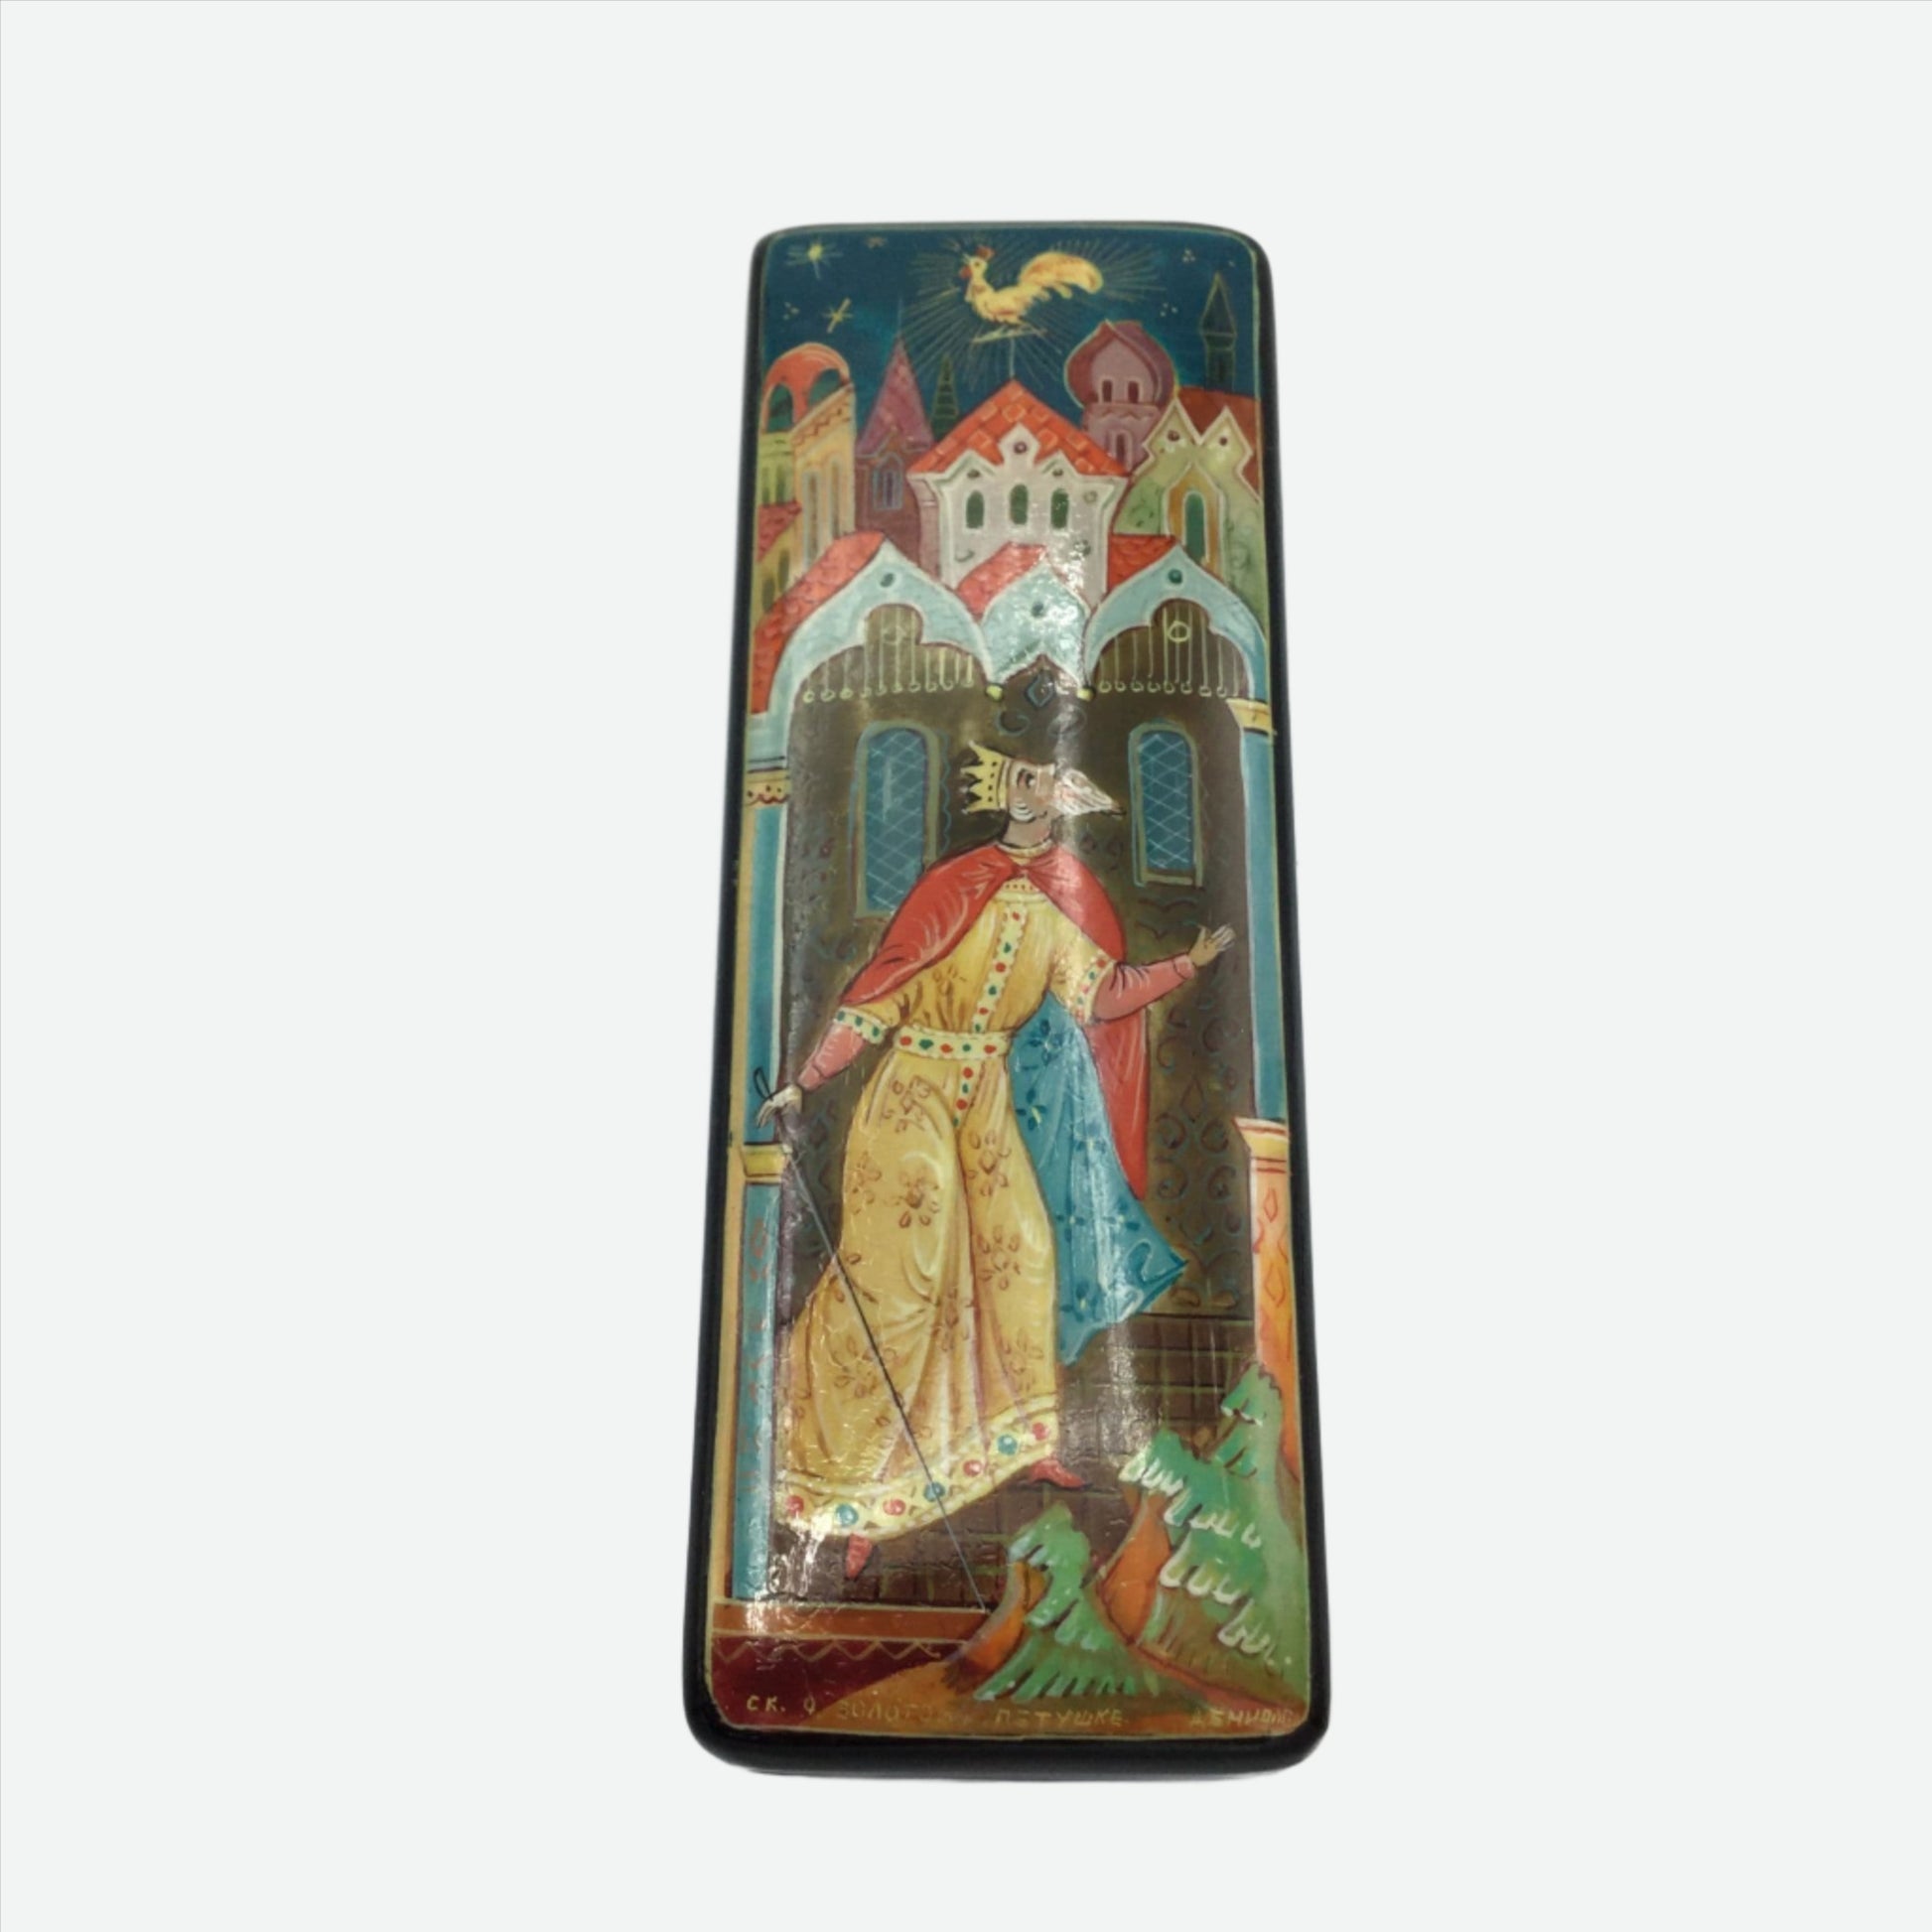 Black handpainted box with a colourful painting of a king looking at a cockerel above him